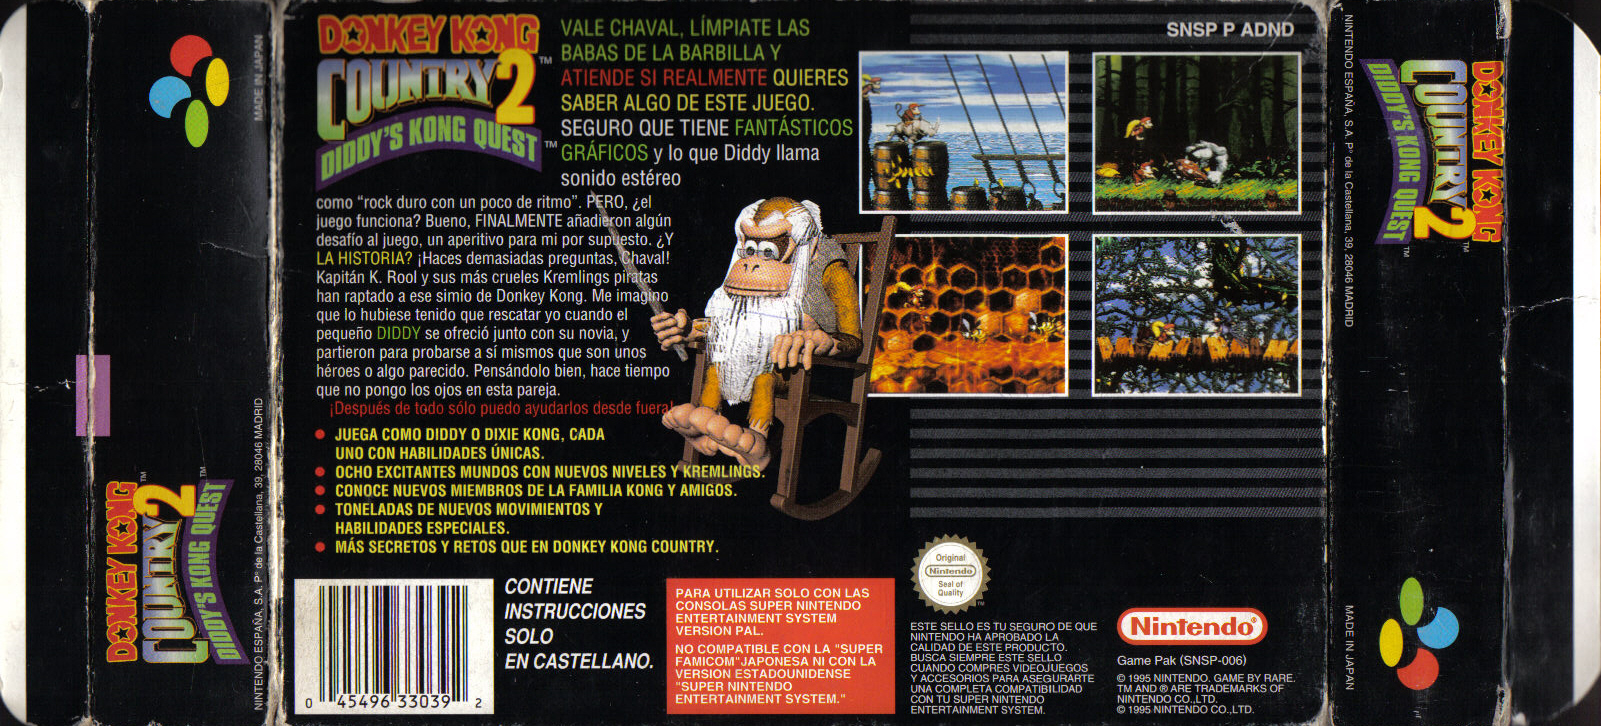 peaso.com » SNES » ROMs » Plataformas » Donkey Kong Country 2 - Diddy's Kong  Quest